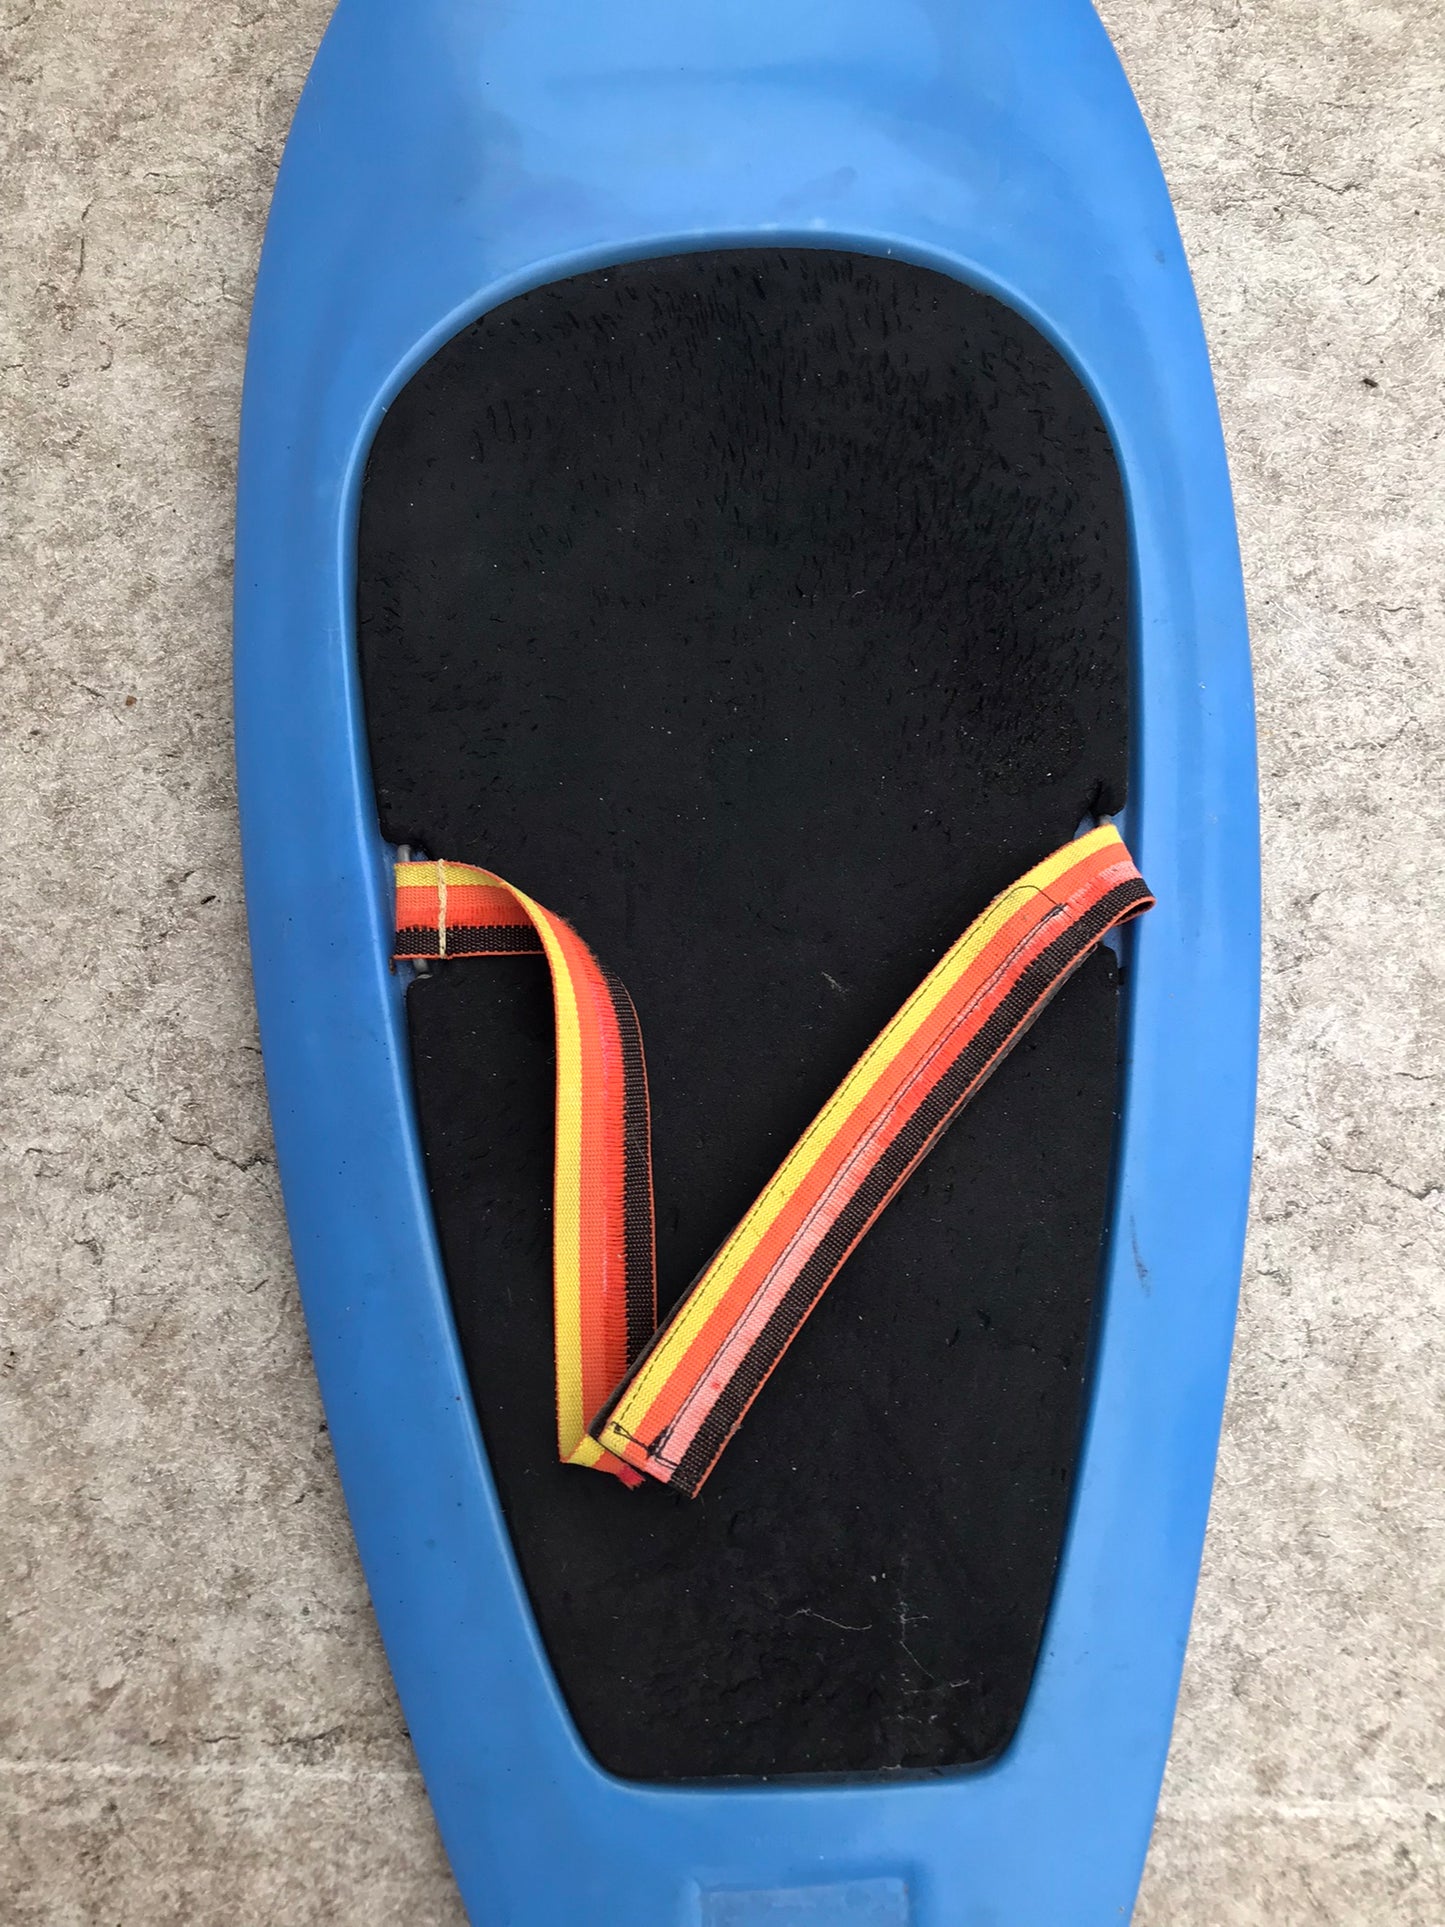 Water Sports Kneeboard Surf, Boogie Bodyboard 56 x 20 inch Heavy Thick Velcro Strap Some Wear Marks on The Black Pad